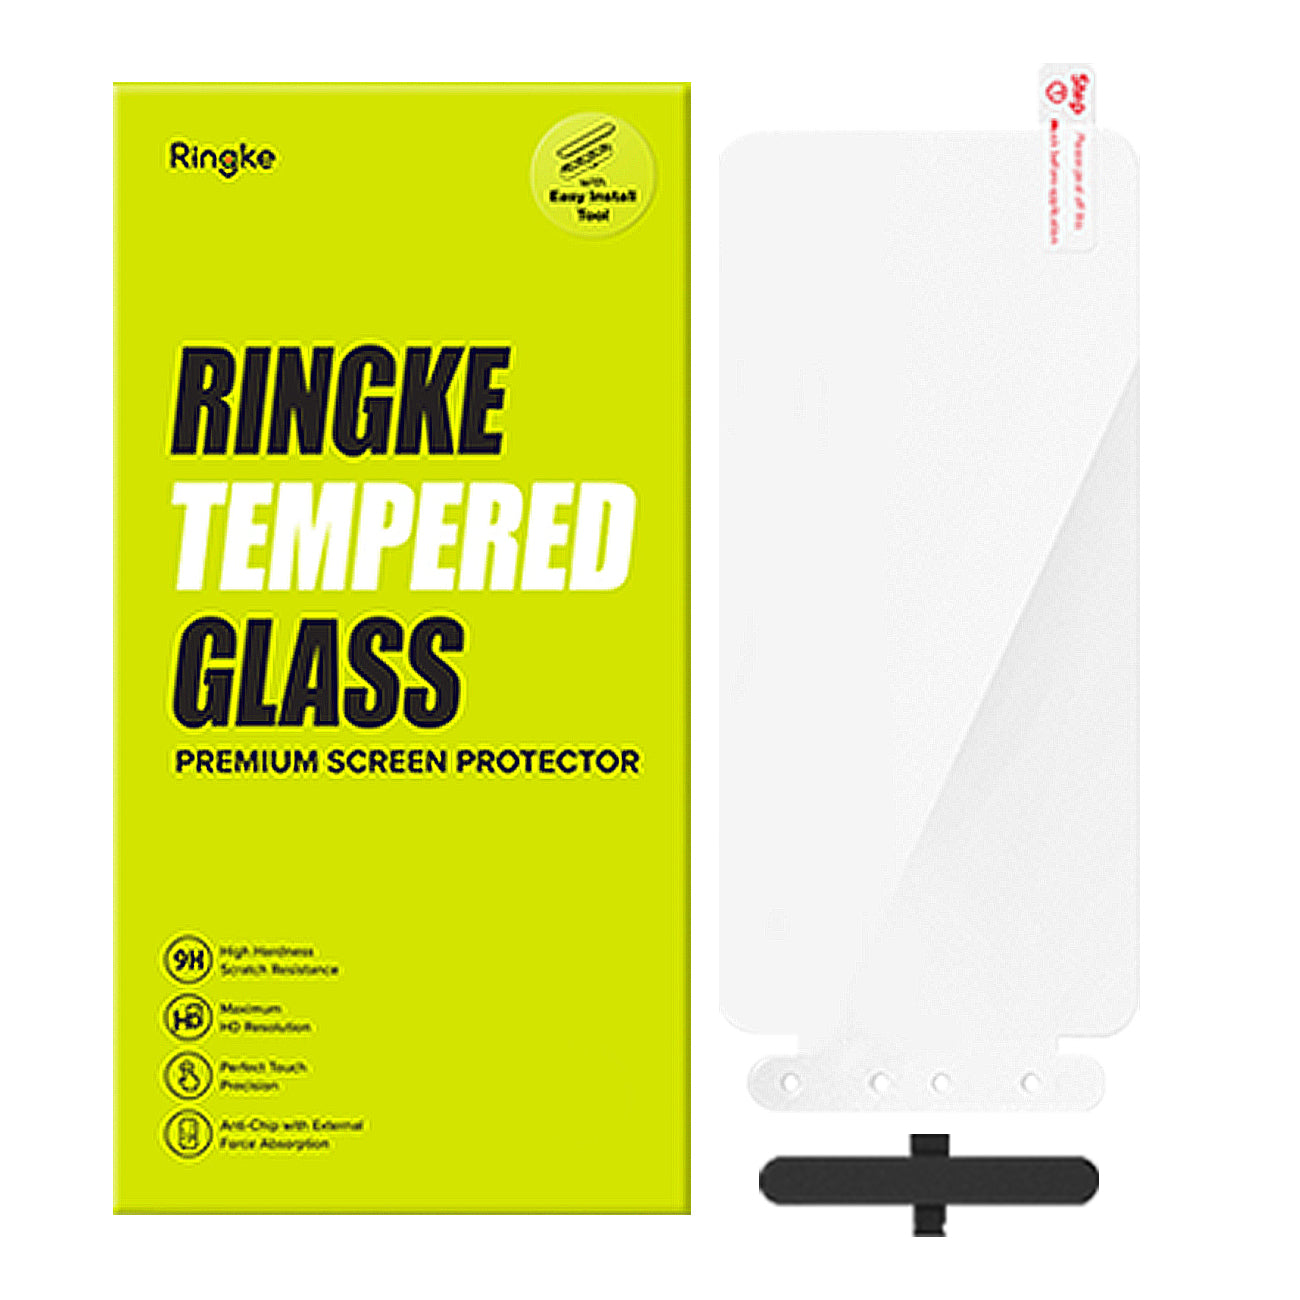 Ringke TEMPERED GLASS SCREEN PROTECTOR